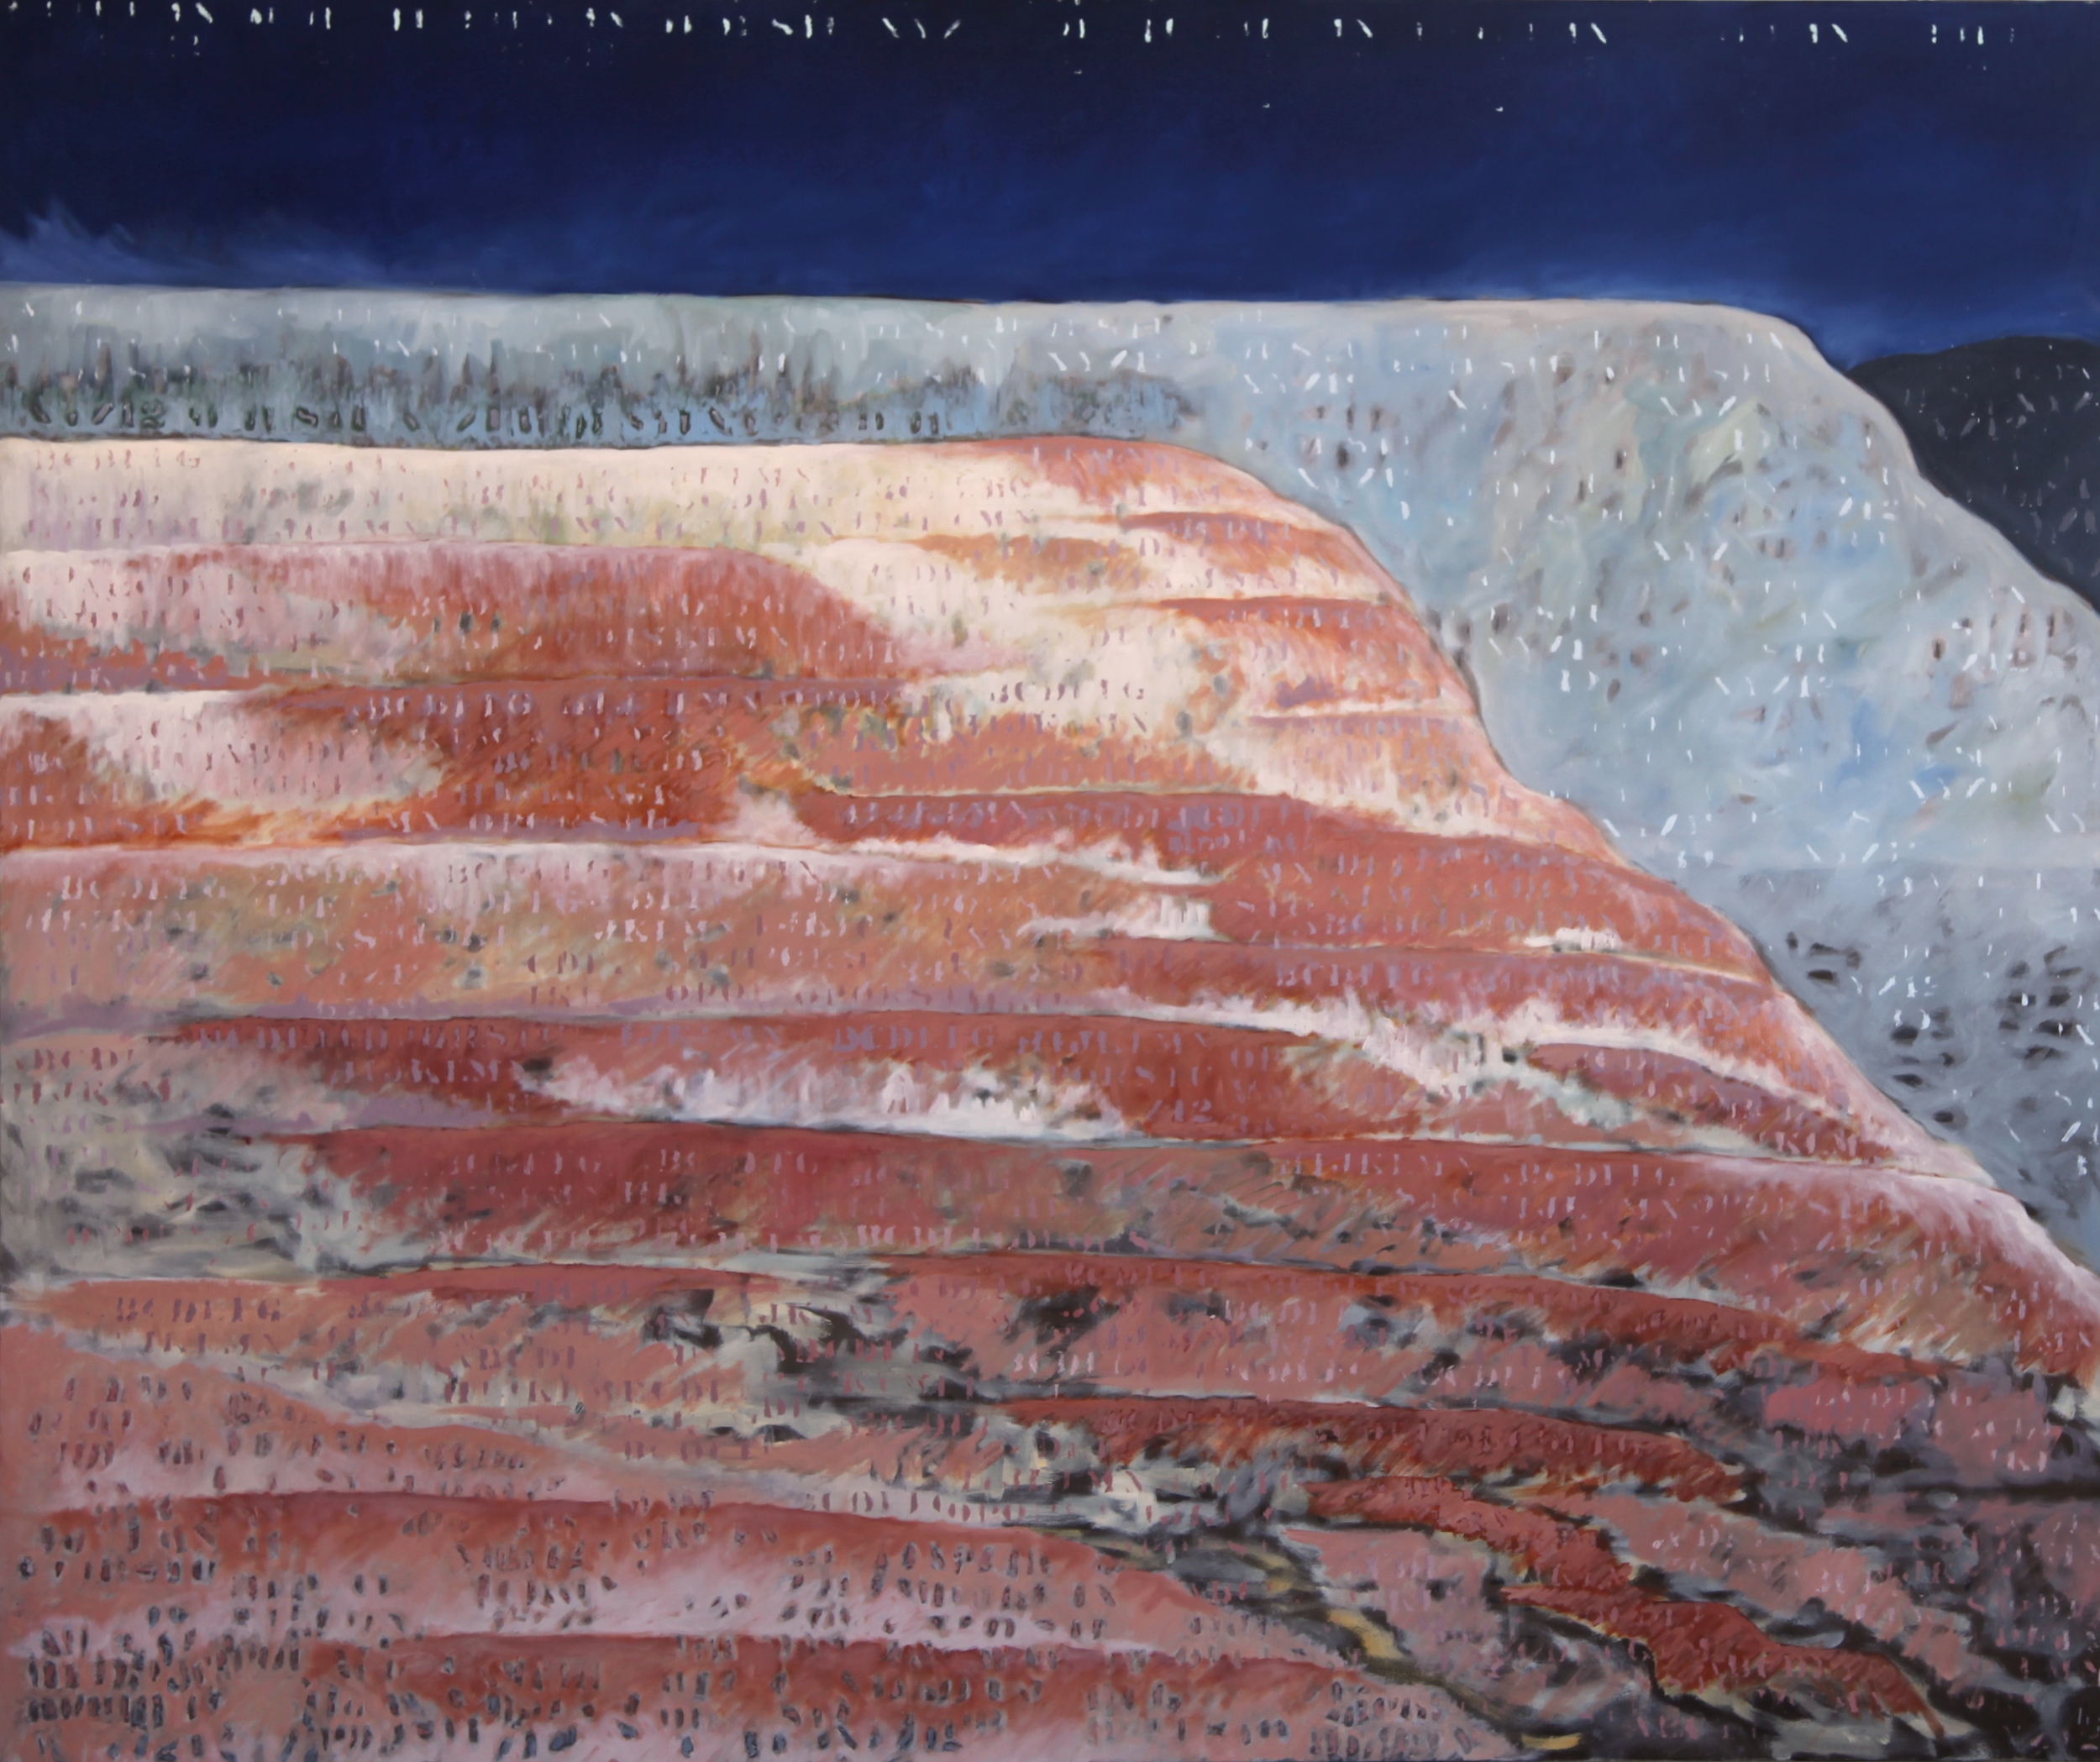   Mammoth Hot Springs, Yellowstone   oil on canvas  60" x 72"  1993-94  $12,000   